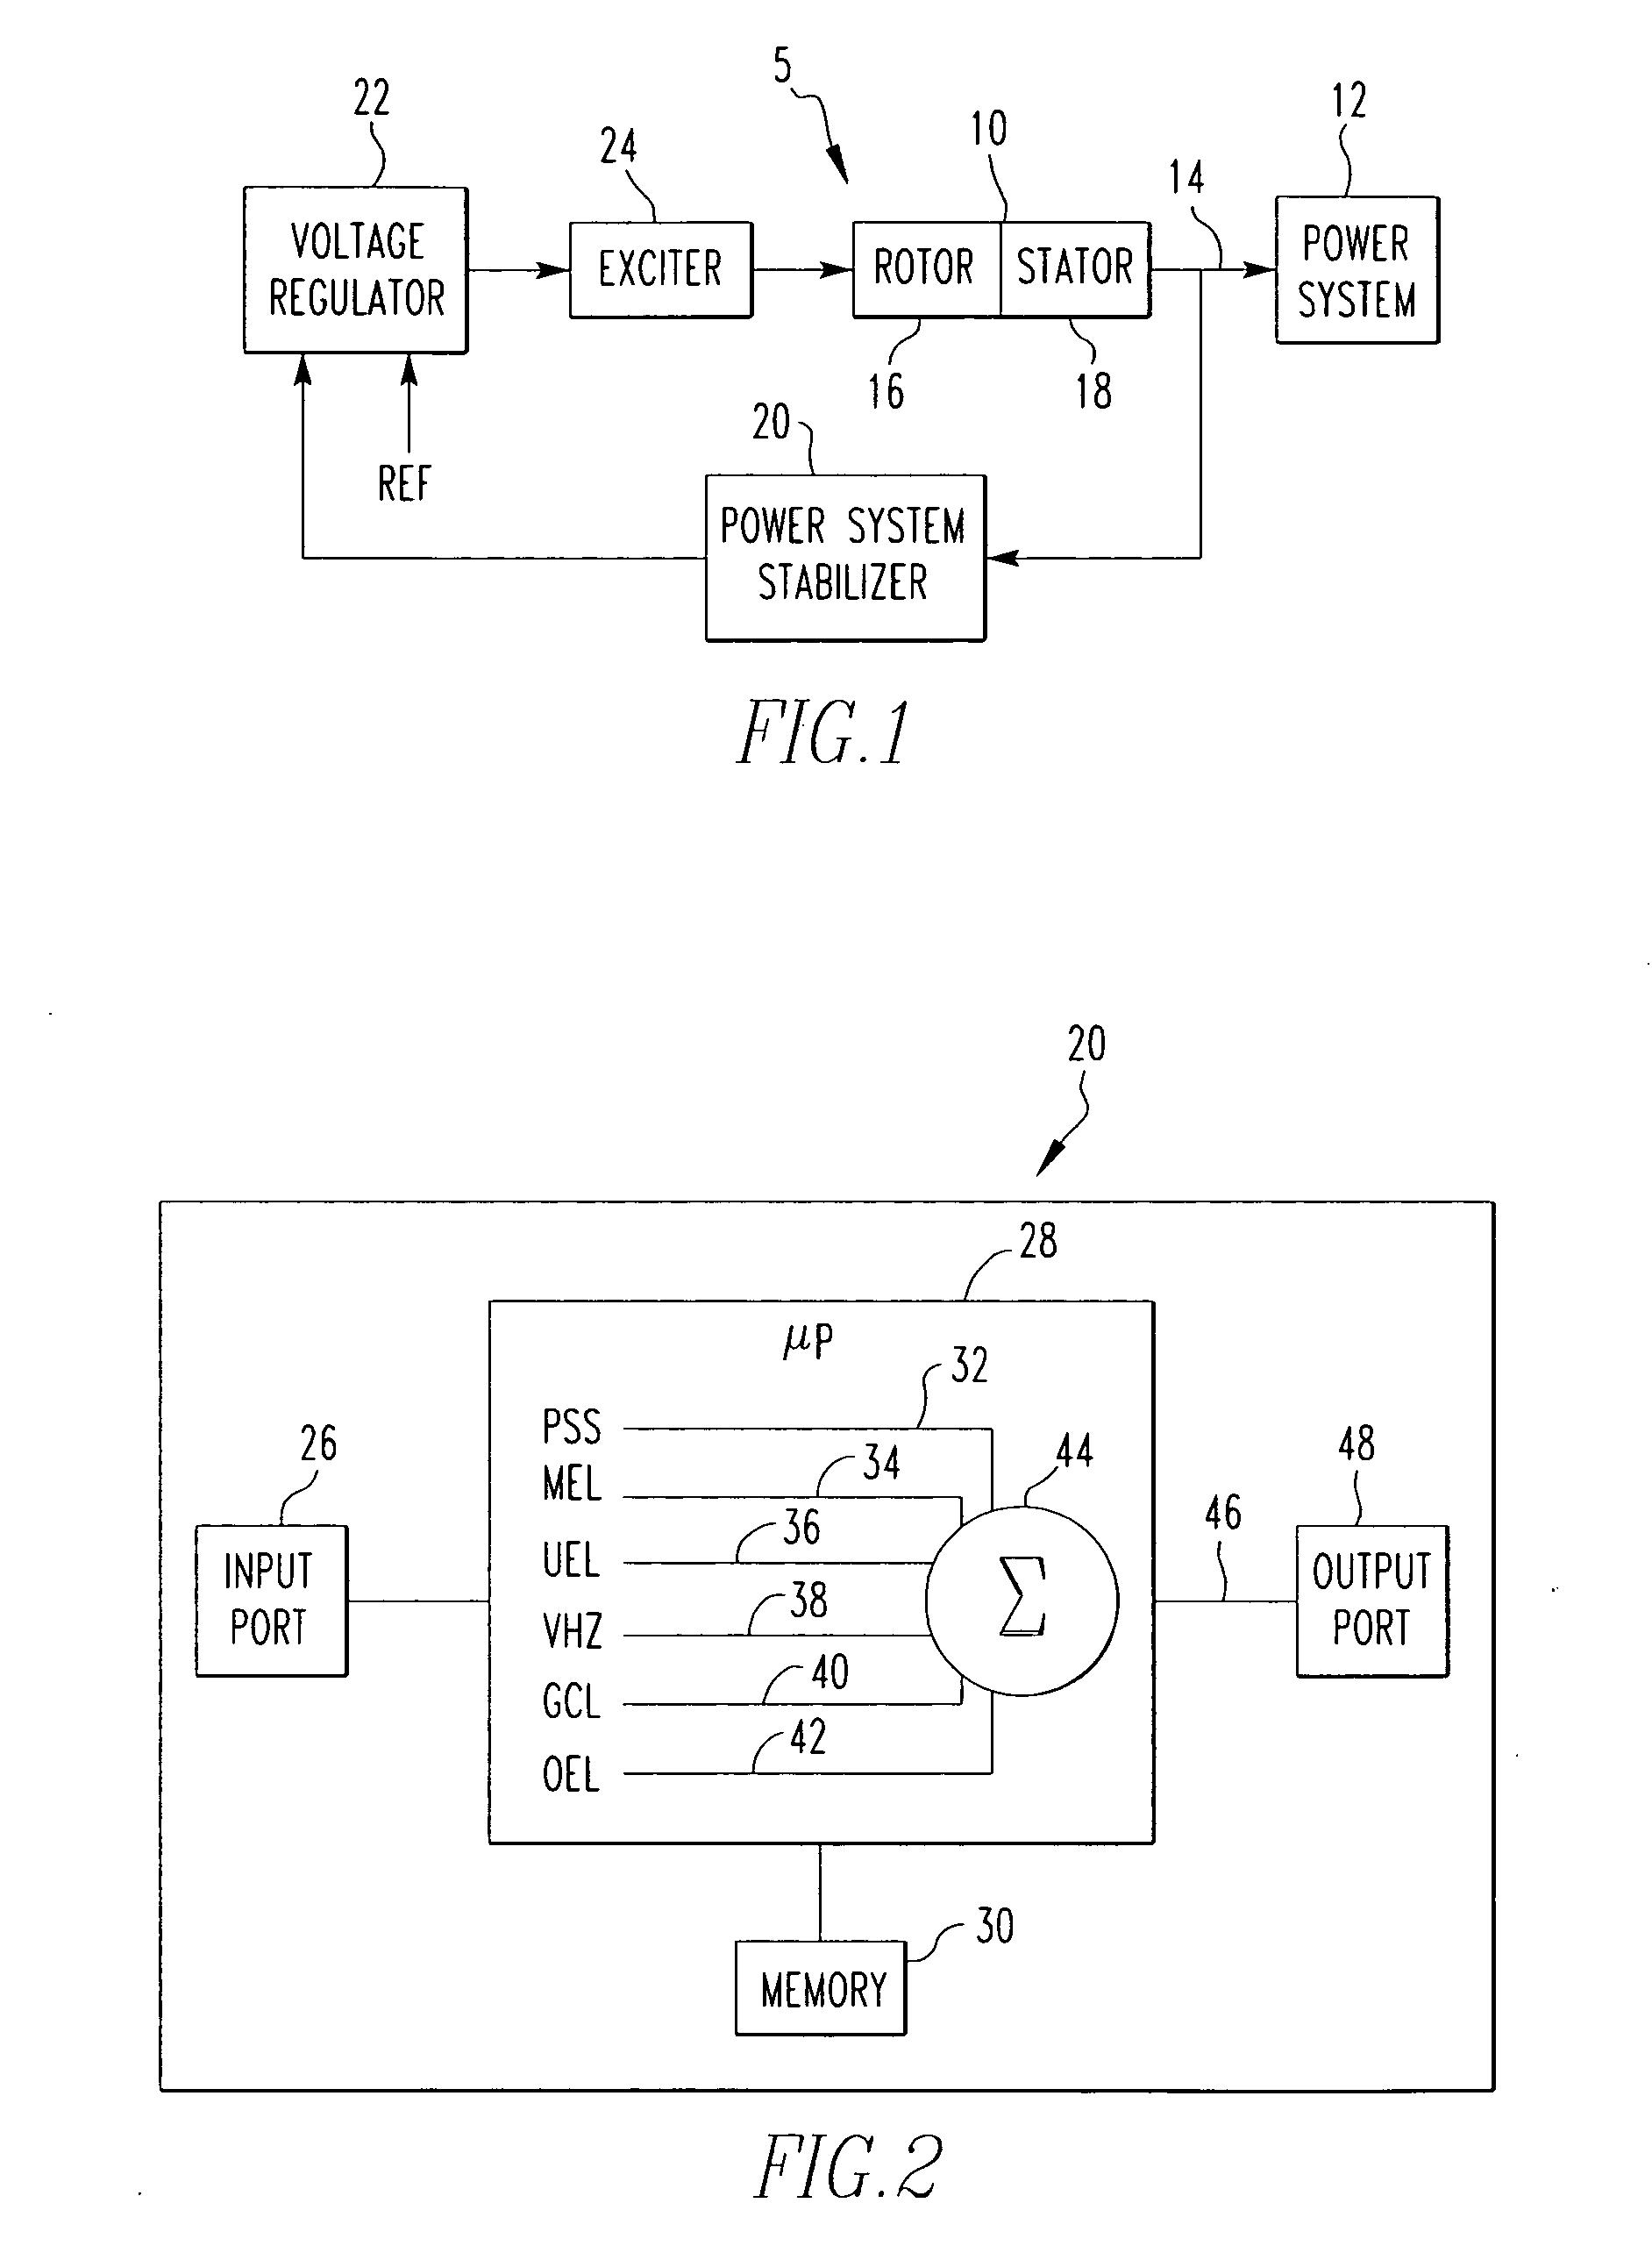 Power system stabilizer providing excitation limiter functions